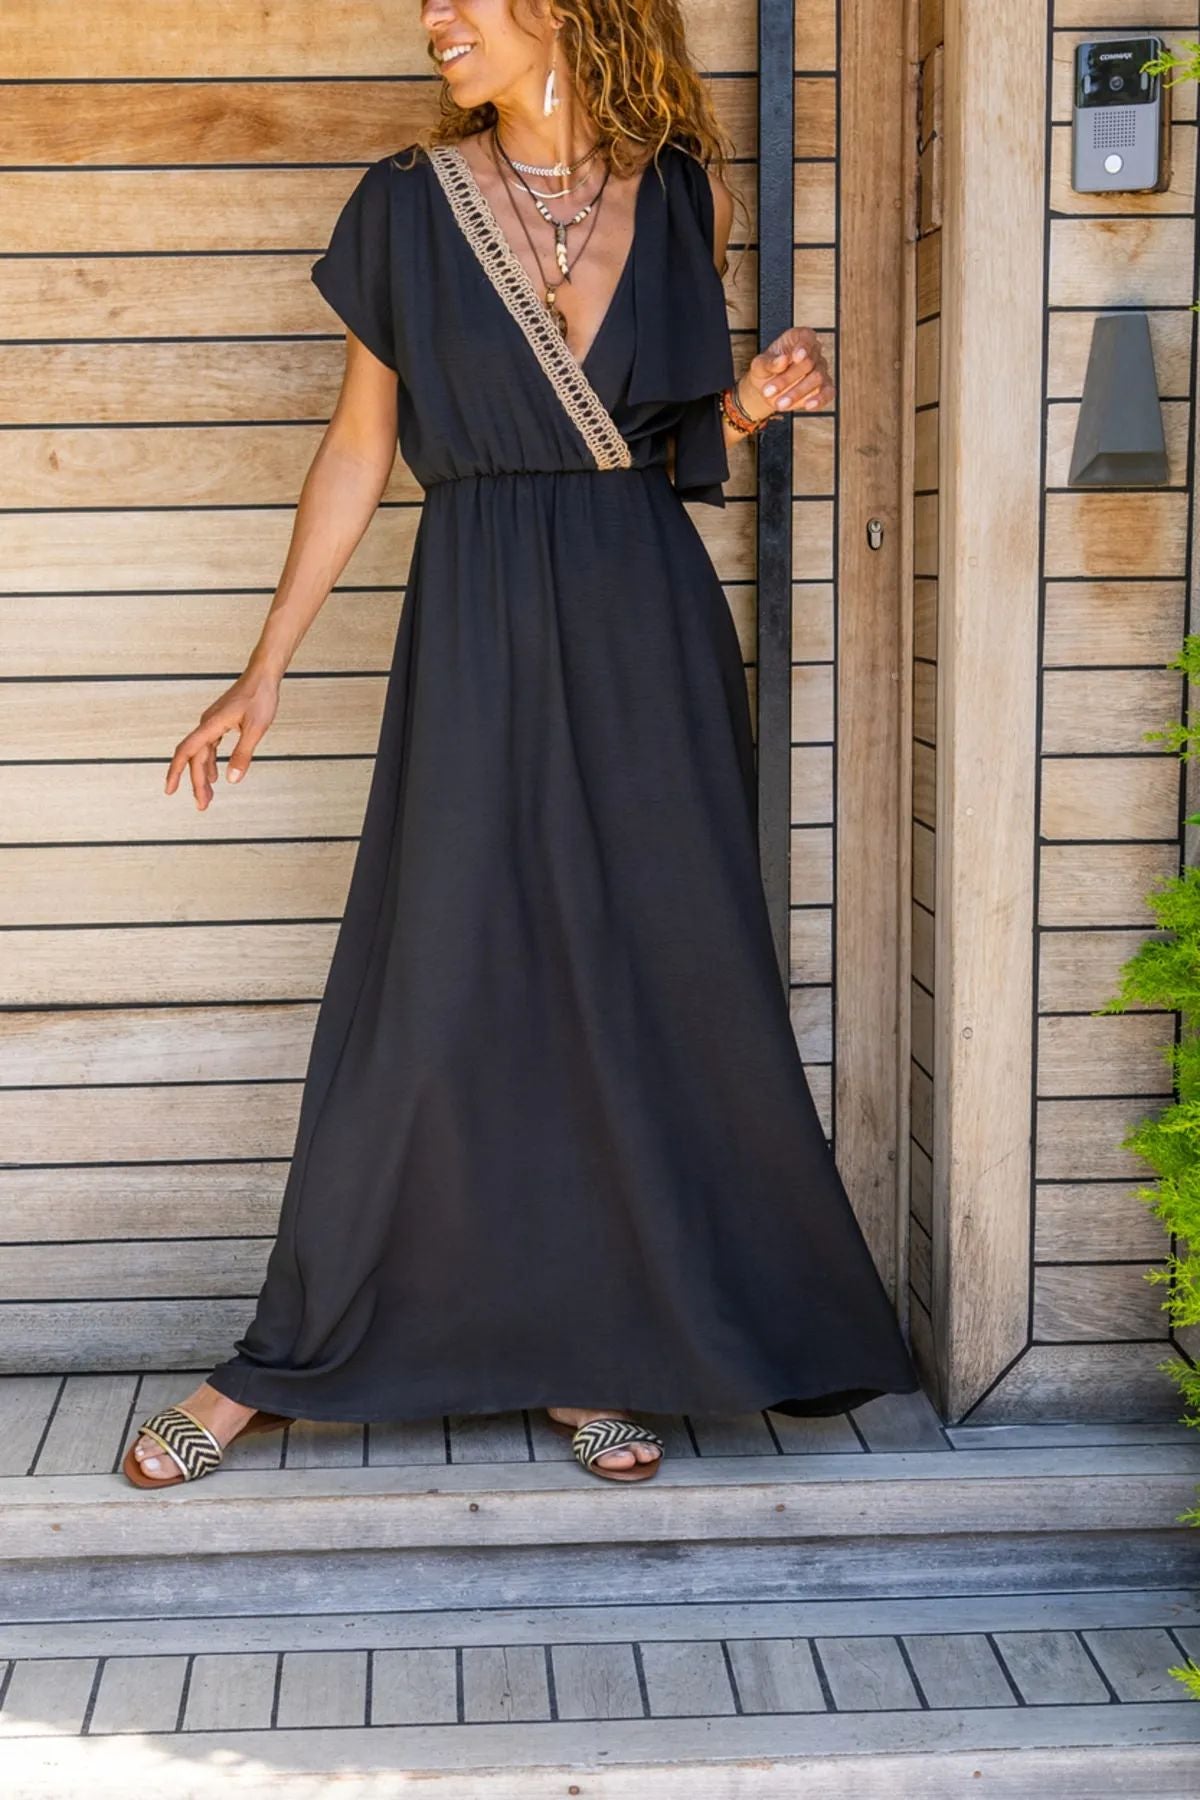 Black sexy wrap-neck dress, New season women's dress with straw embroidery, Long loose-fit comfortable dress, Half-sleeve stylish casual dress, Polyester-cotton blend dress produced in Turkey.